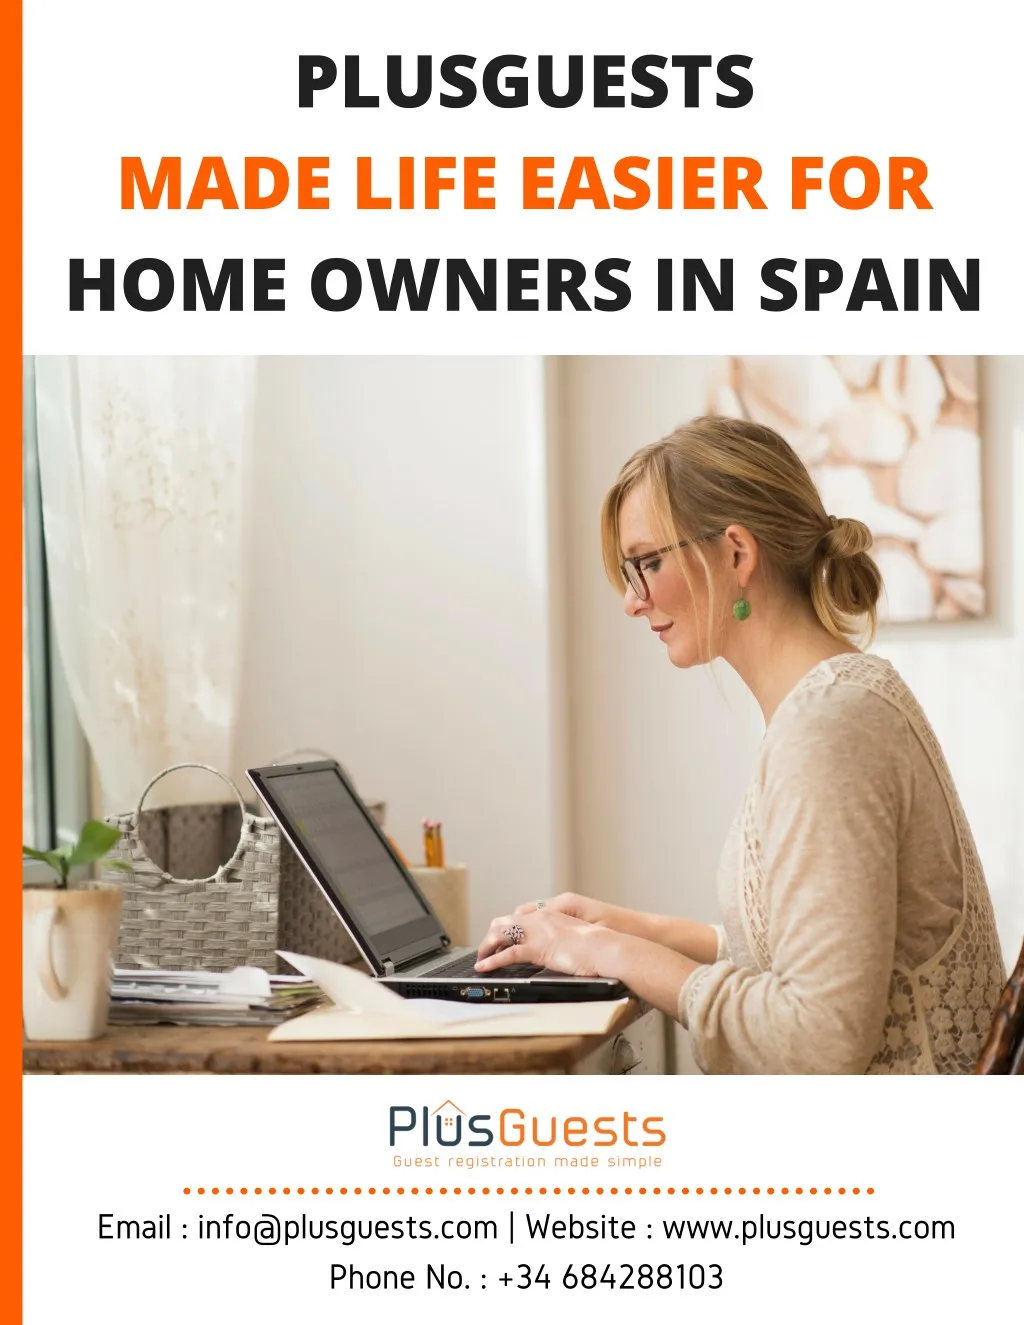 plusguests made life easier for home owners